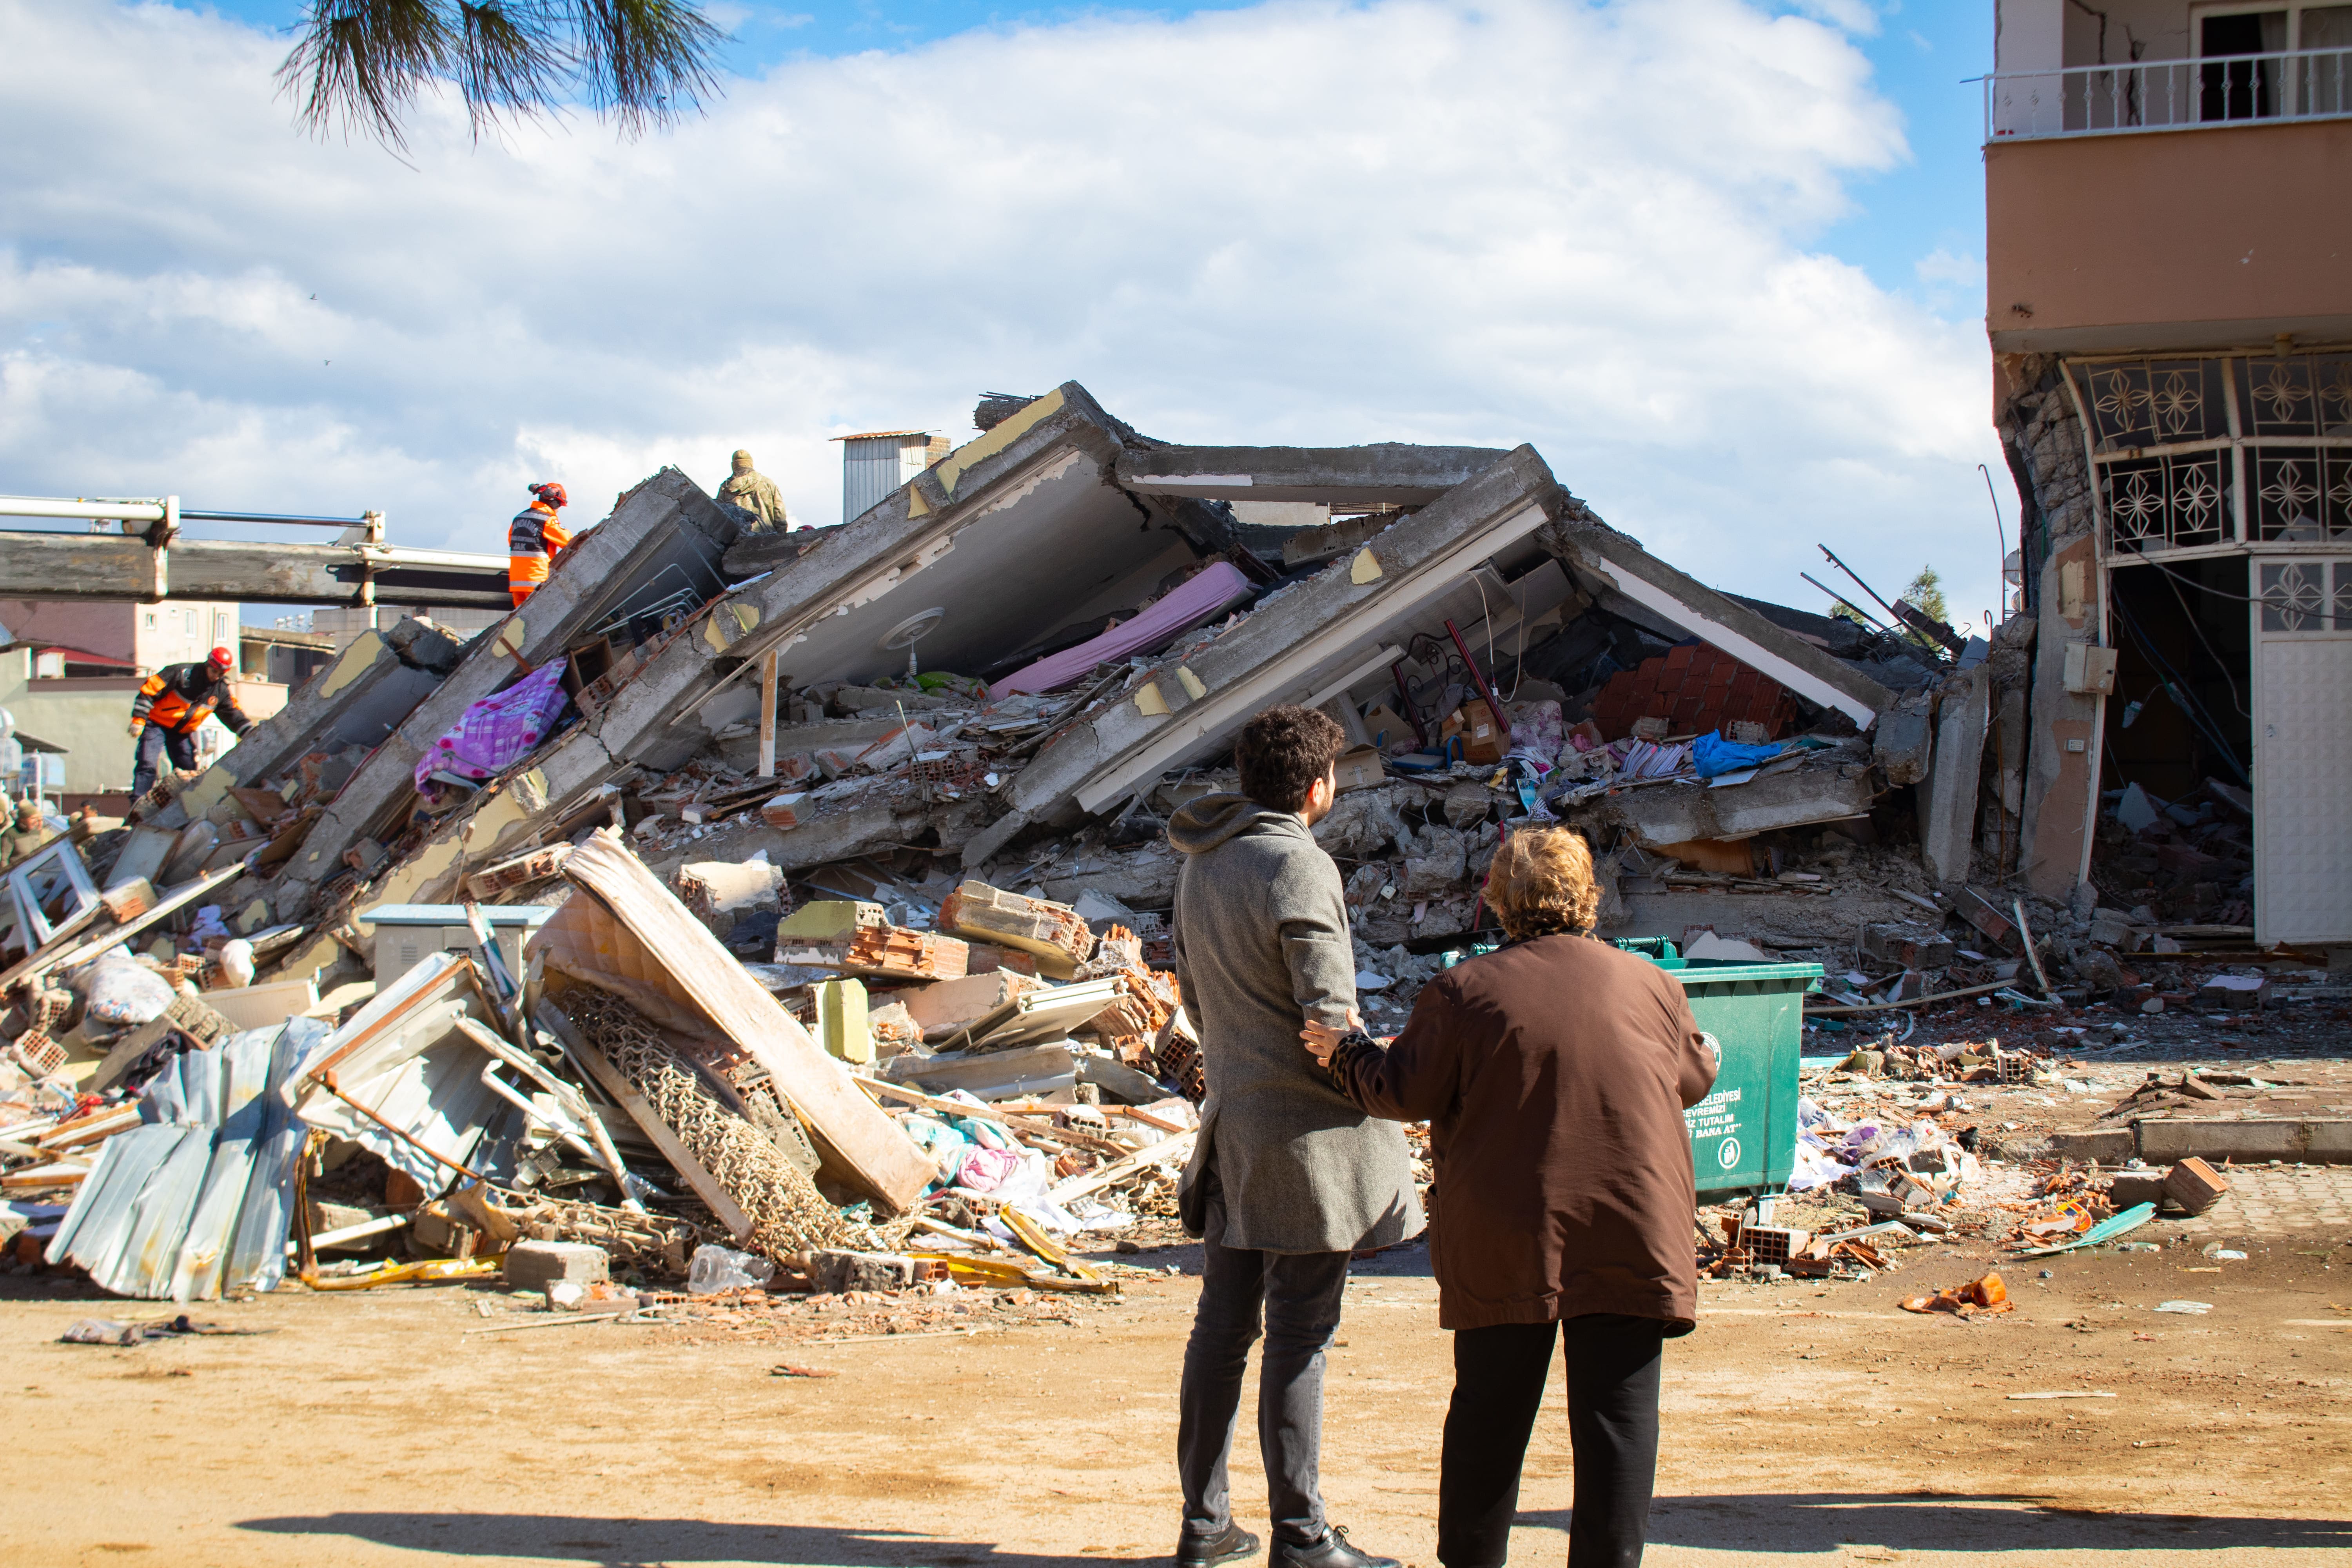 A man and woman look at a collapsed building in Islahyia, Türkiye, on 7 February 2023.